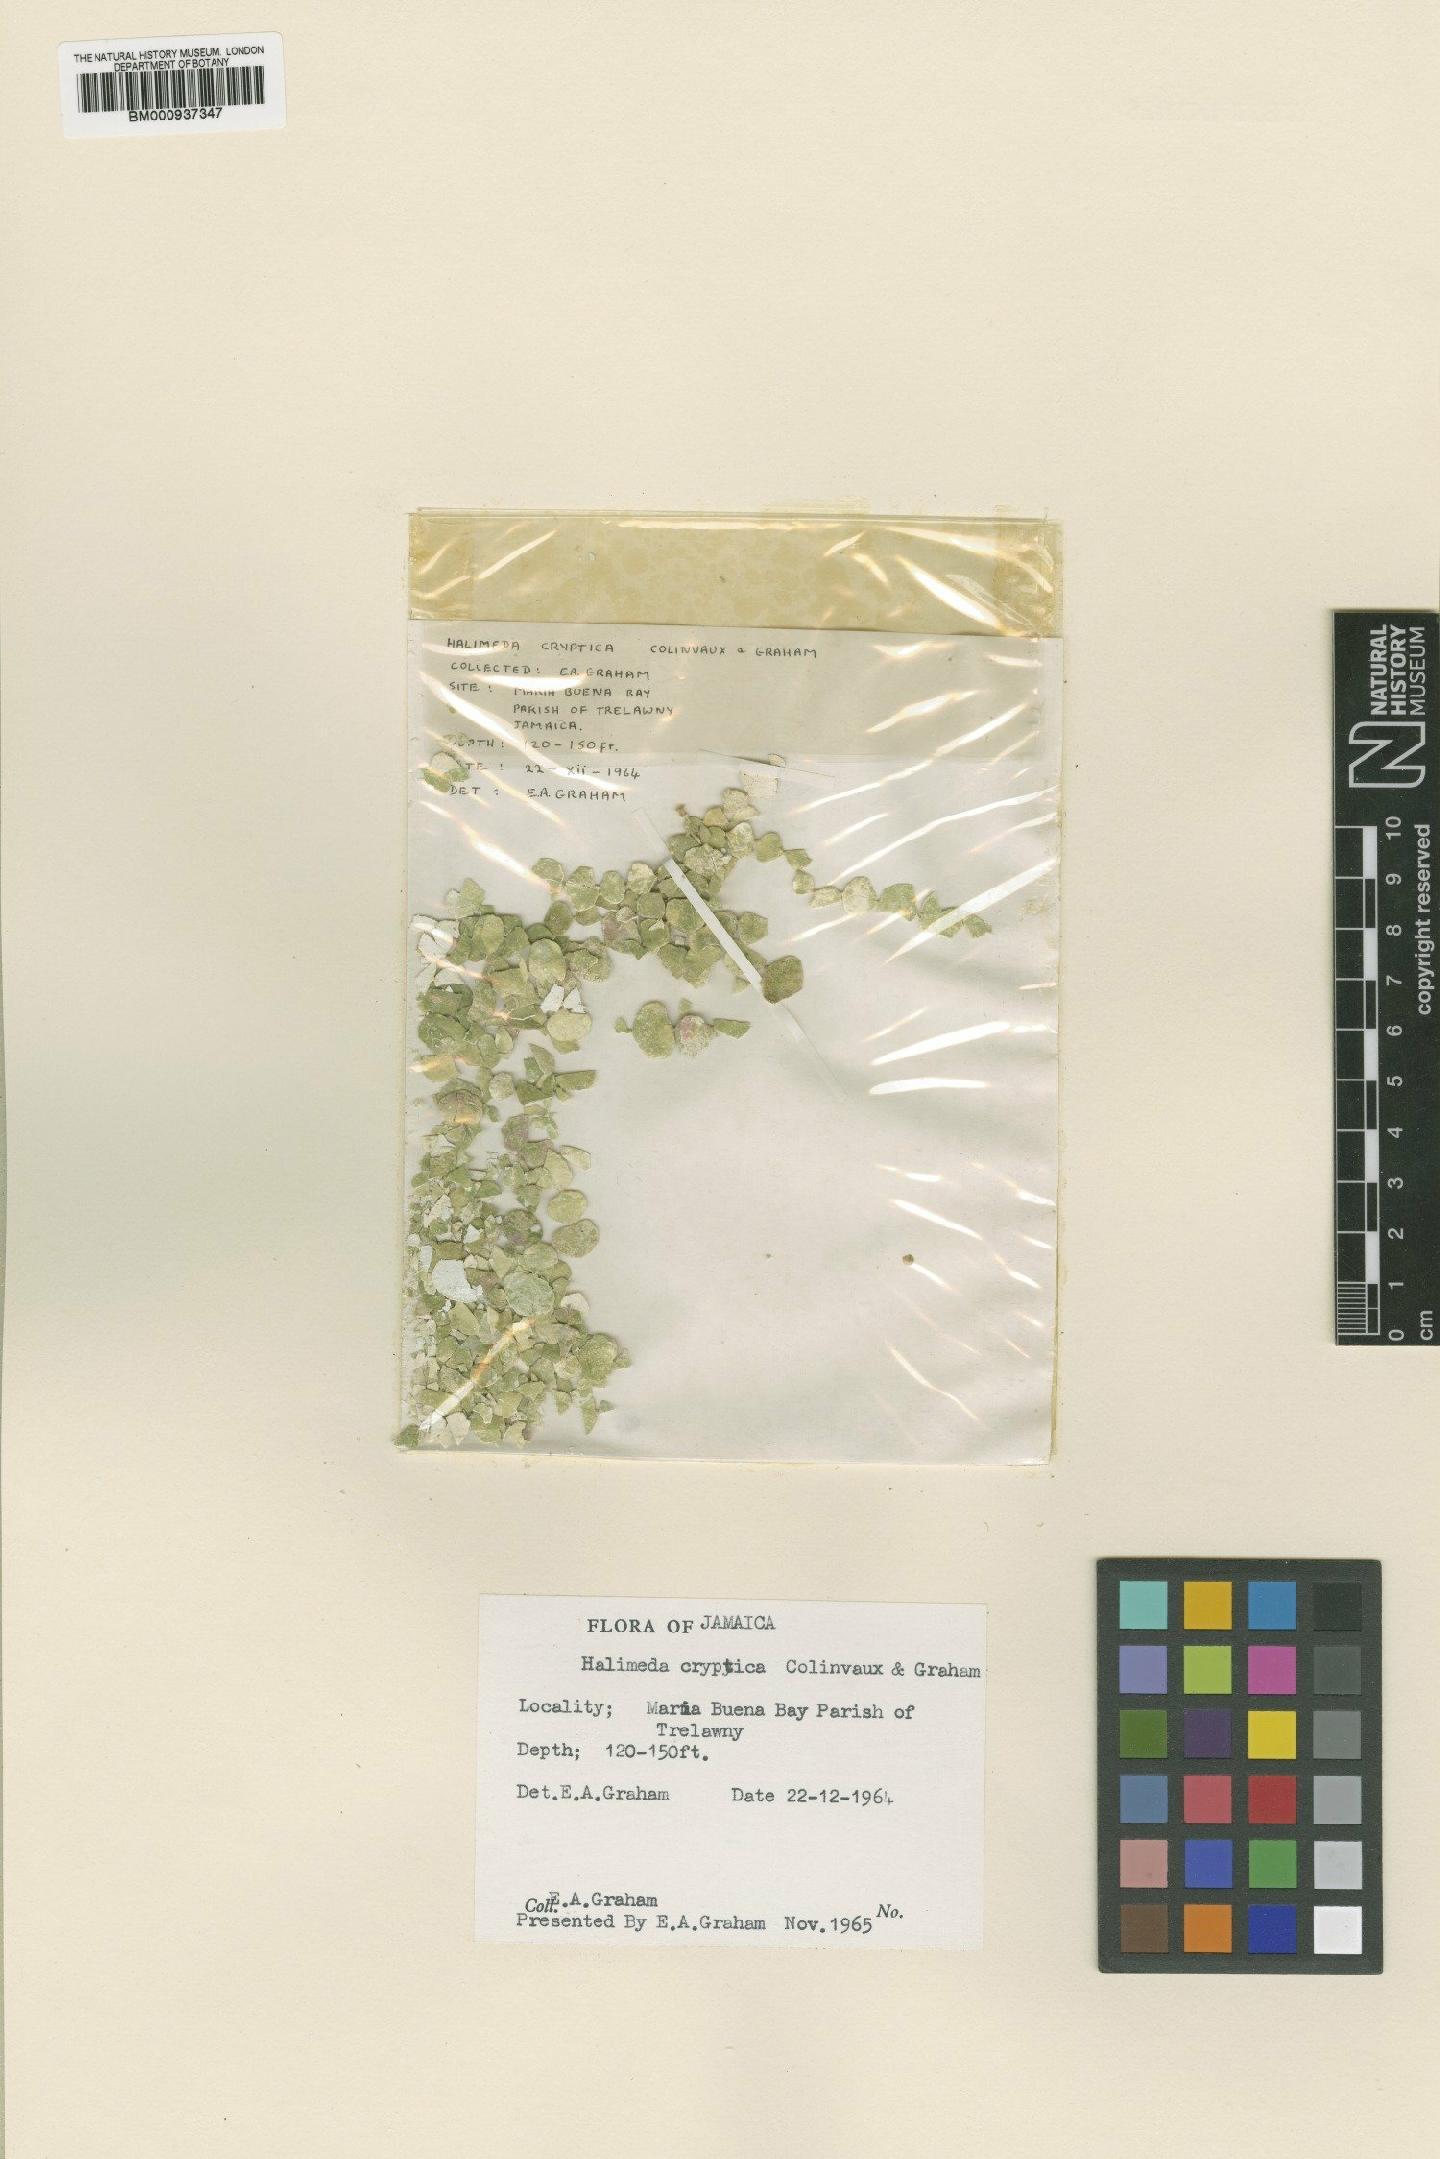 To NHMUK collection (Halimeda cryptica Colinvaux & Graham; Type; NHMUK:ecatalogue:479720)